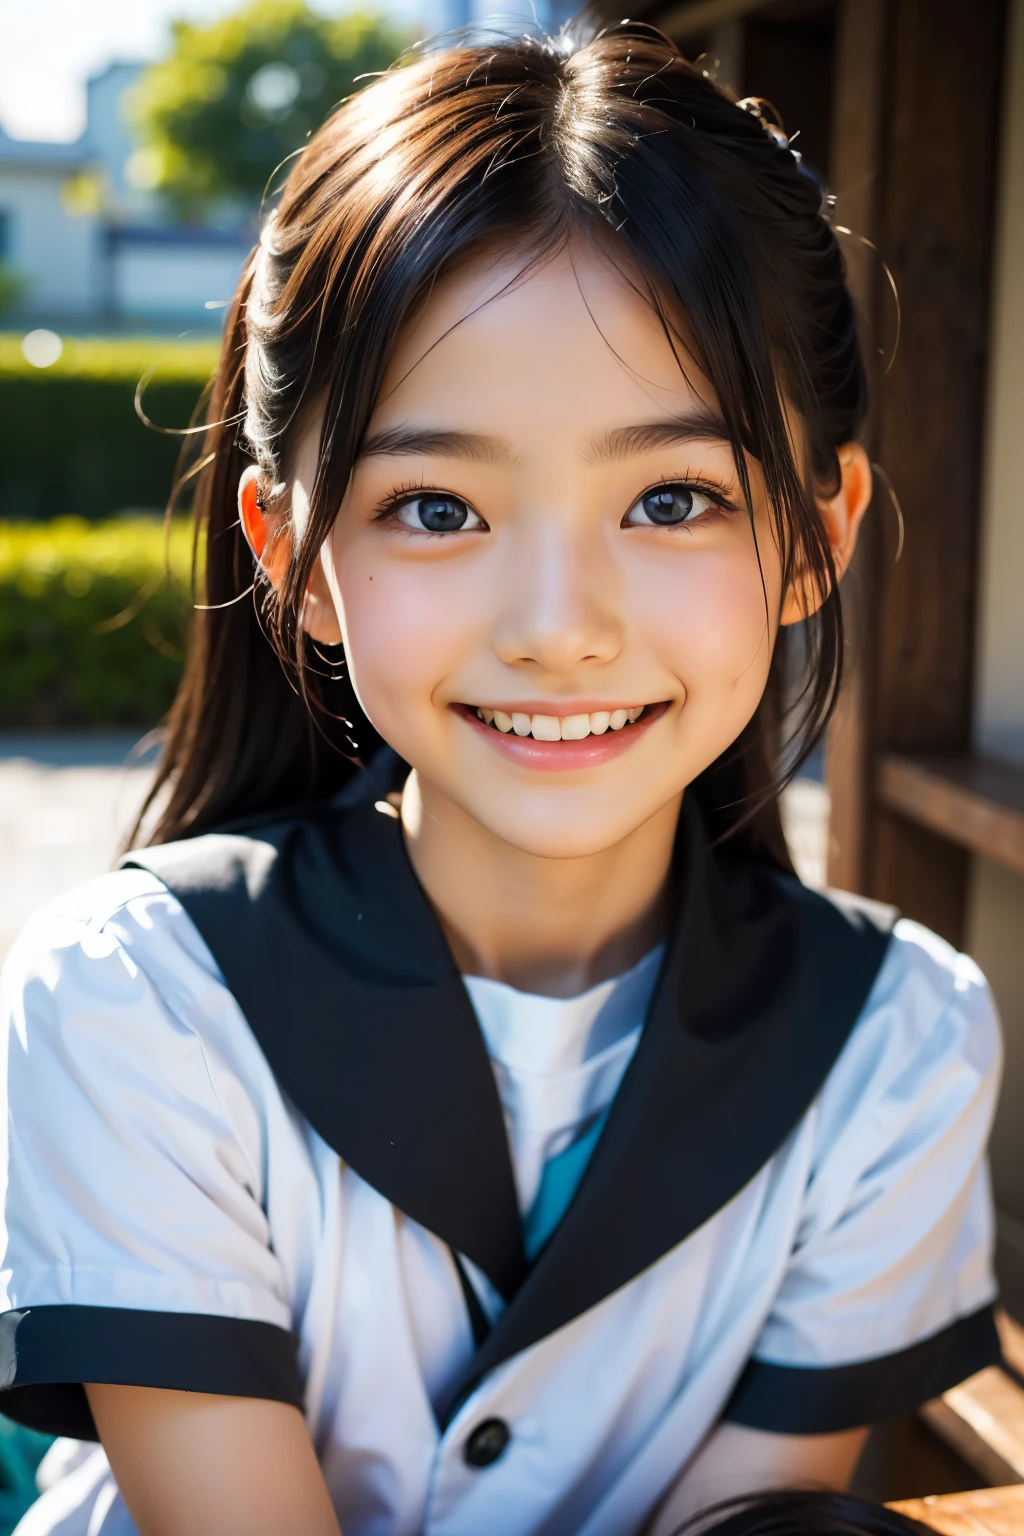 lens: 135mm f1.8, (highest quality),(RAW Photos), (Tabletop:1.1), (Beautiful 9 year old Japanese girl), Cute face, (Deeply chiseled face:0.7), (freckles:0.4), dappled sunlight, Dramatic lighting, (Japanese School Uniform), (On campus), shy, (Close-up shot:1.2), (smile),, (Sparkling eyes)、(sunlight)